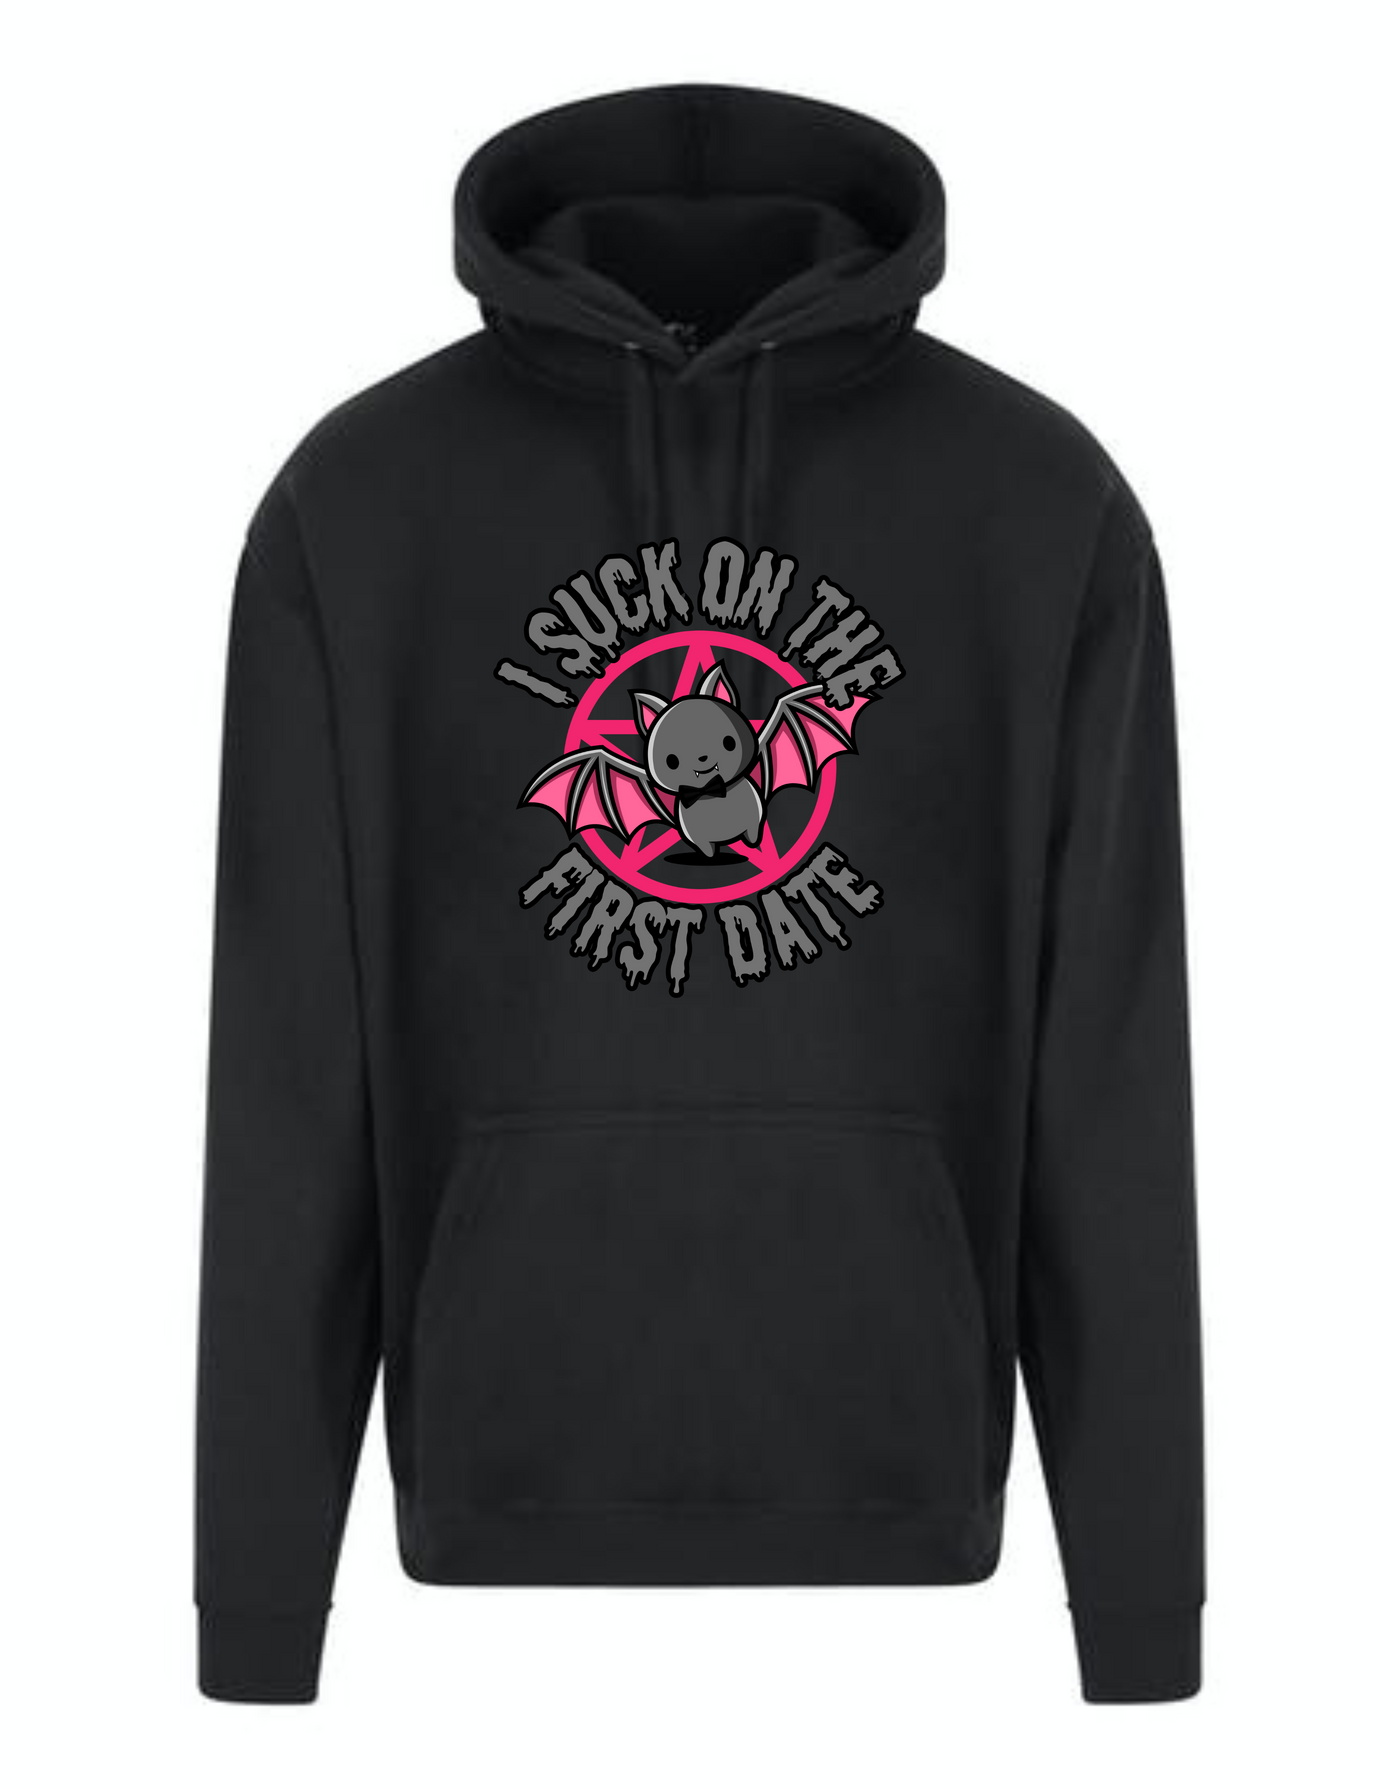 "I Suck On The First Date" Longline Unisex Hoodie